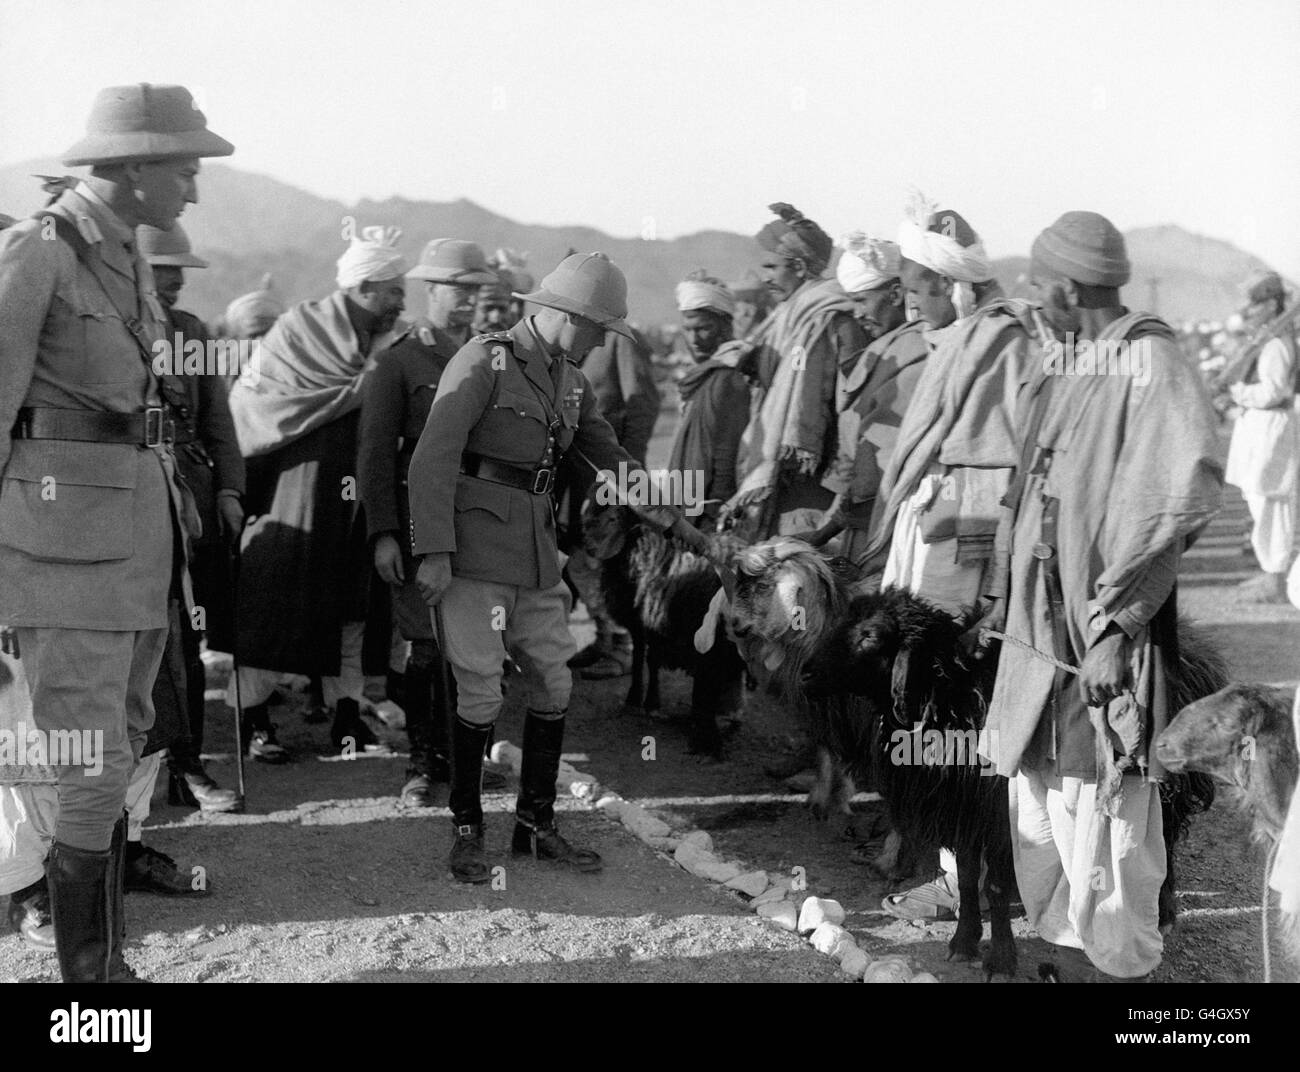 The Prince of Wales receives a gift of sheep presented by the Maliks of the Khyber Agency during his visit to the Khyber Pass at Sarkai Shiga; part of his tour to Japan and the East. The Khyber Pass formed the main crossing point between British India and Afghanistan. Stock Photo